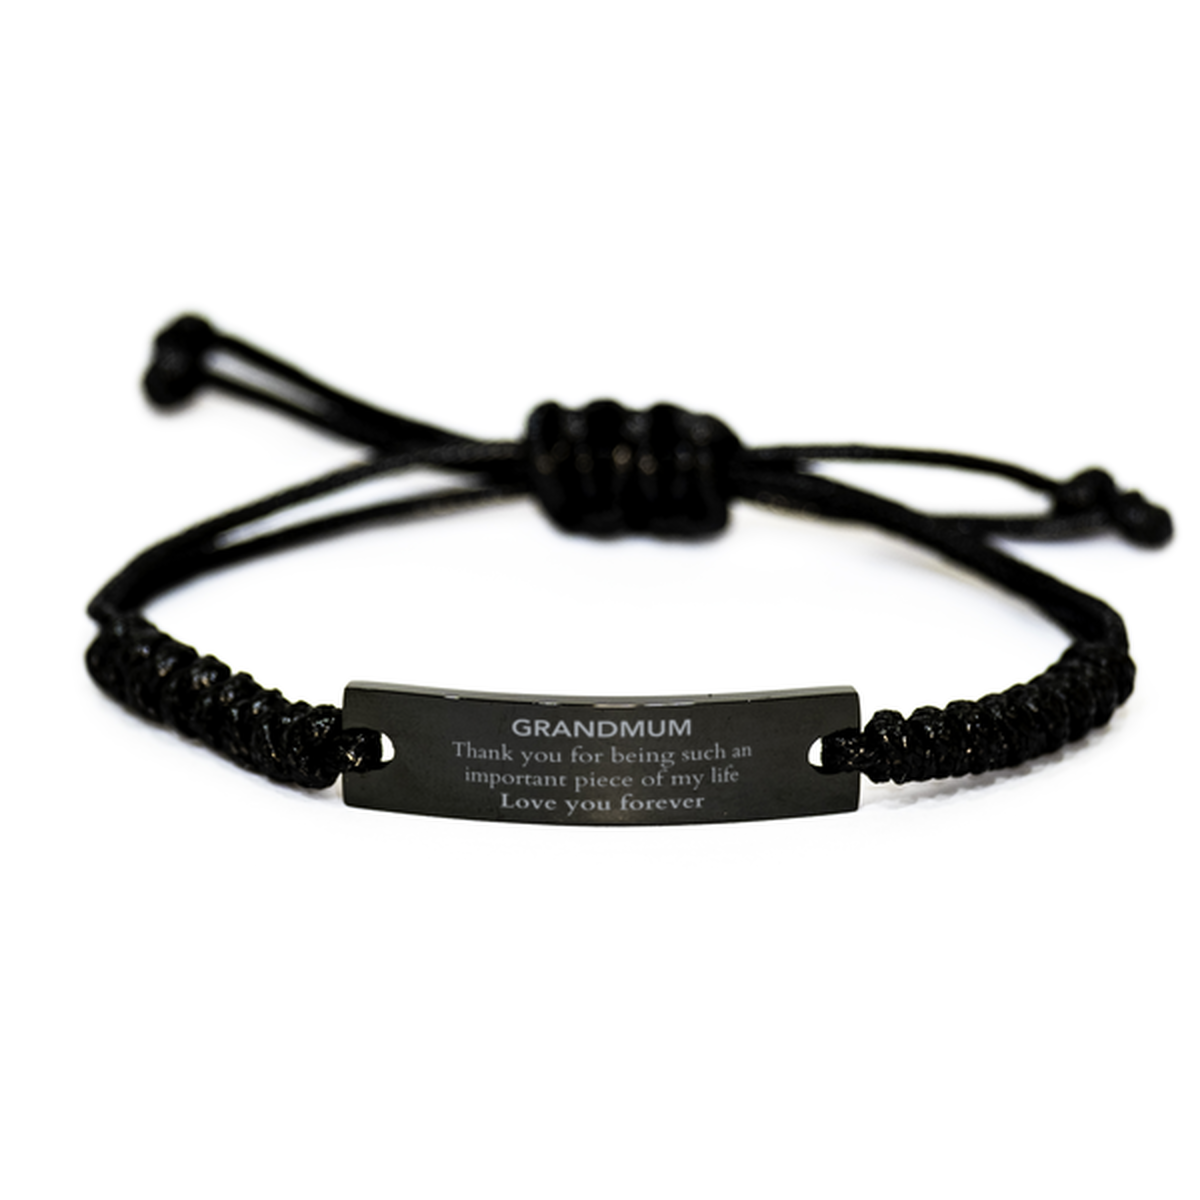 Appropriate Grandmum Black Rope Bracelet Epic Birthday Gifts for Grandmum Thank you for being such an important piece of my life Grandmum Christmas Mothers Fathers Day